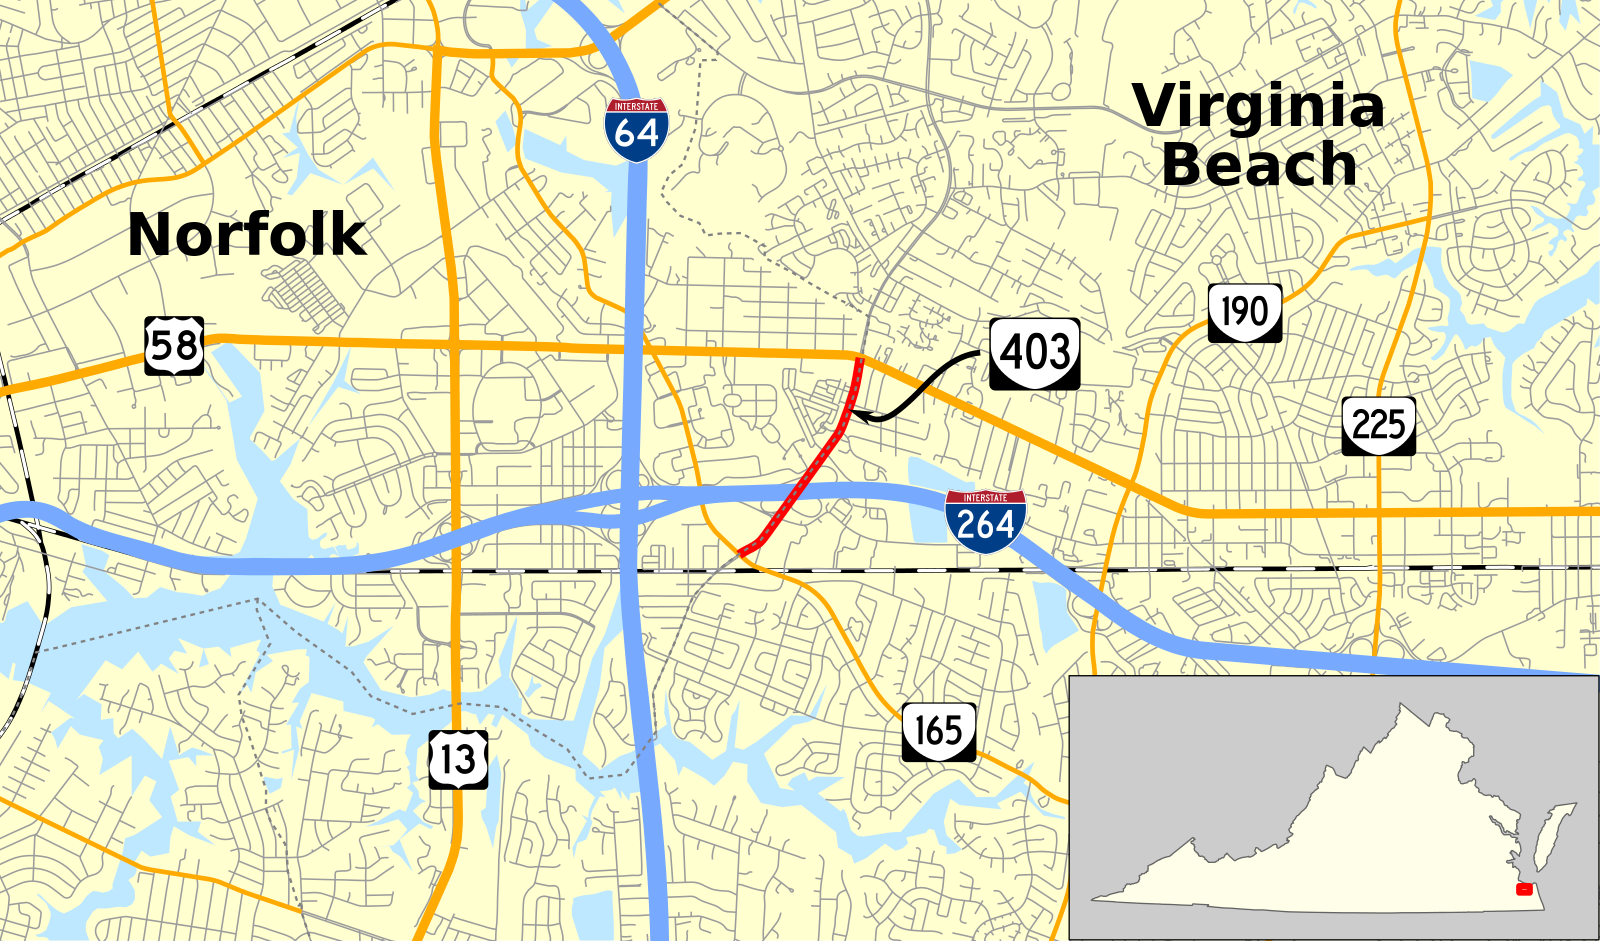 What is norfolk va known for?